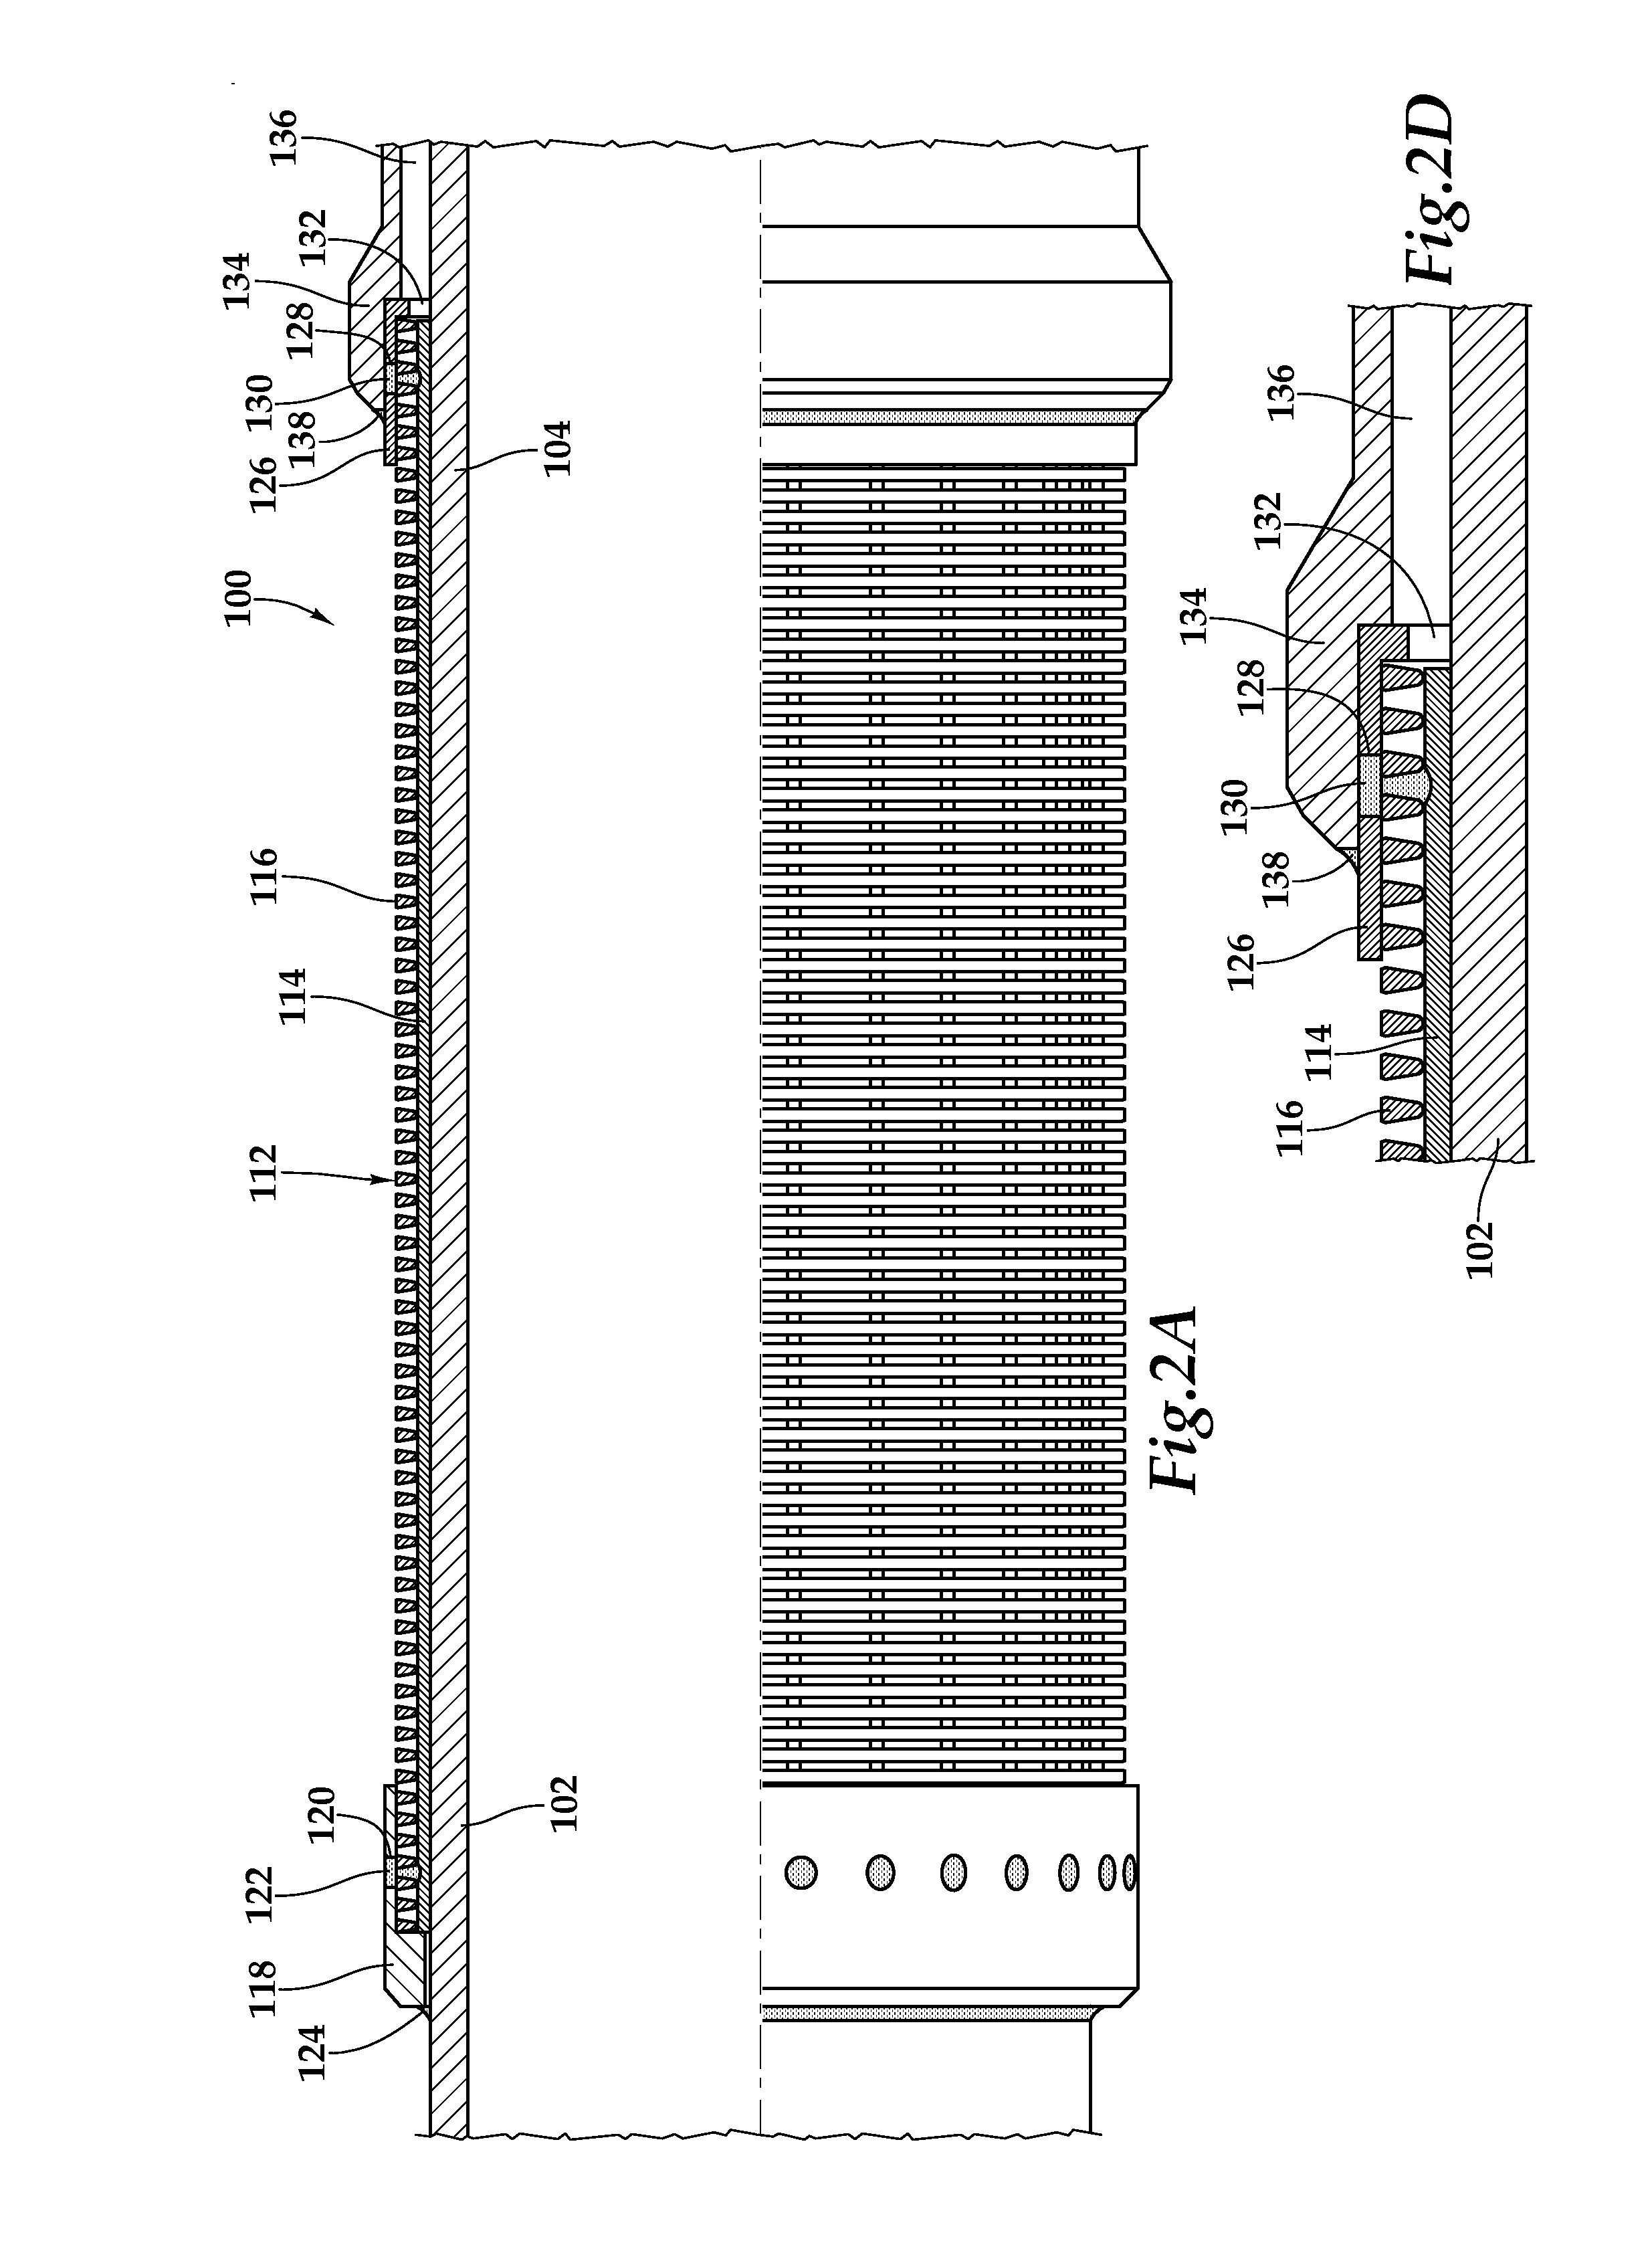 Control Screen Assembly Having Integral Connector Rings and Method for Making Same